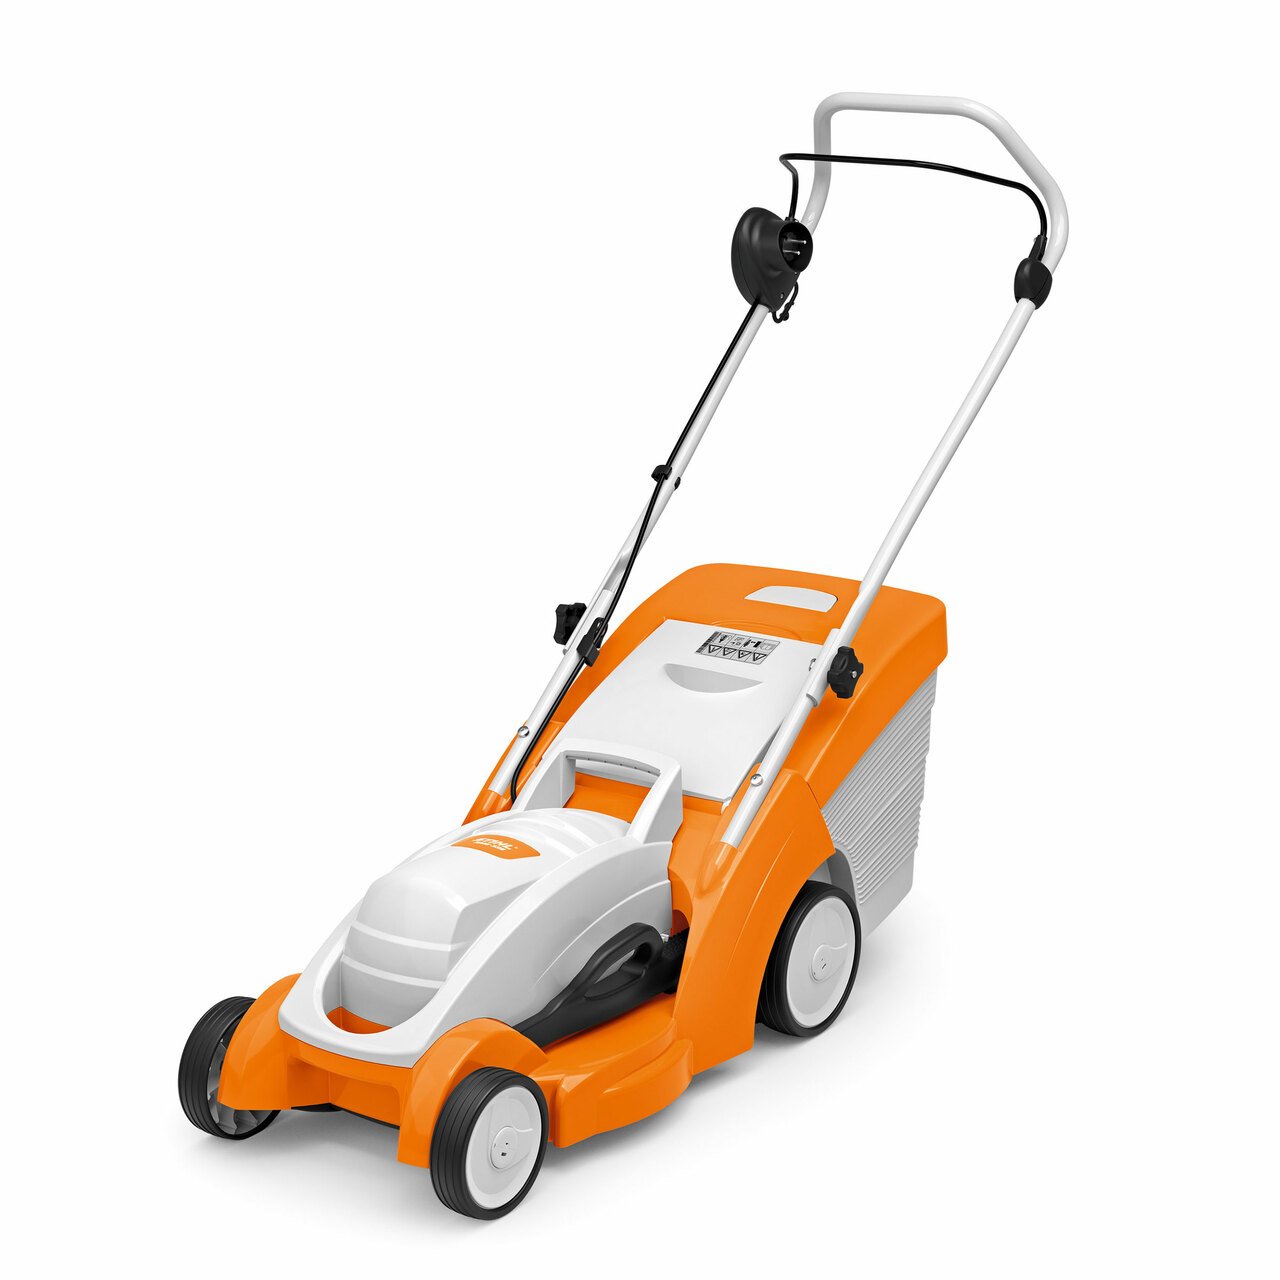 Image of Stihl <br><strong>RME 339 Electric Lawnmower</strong>